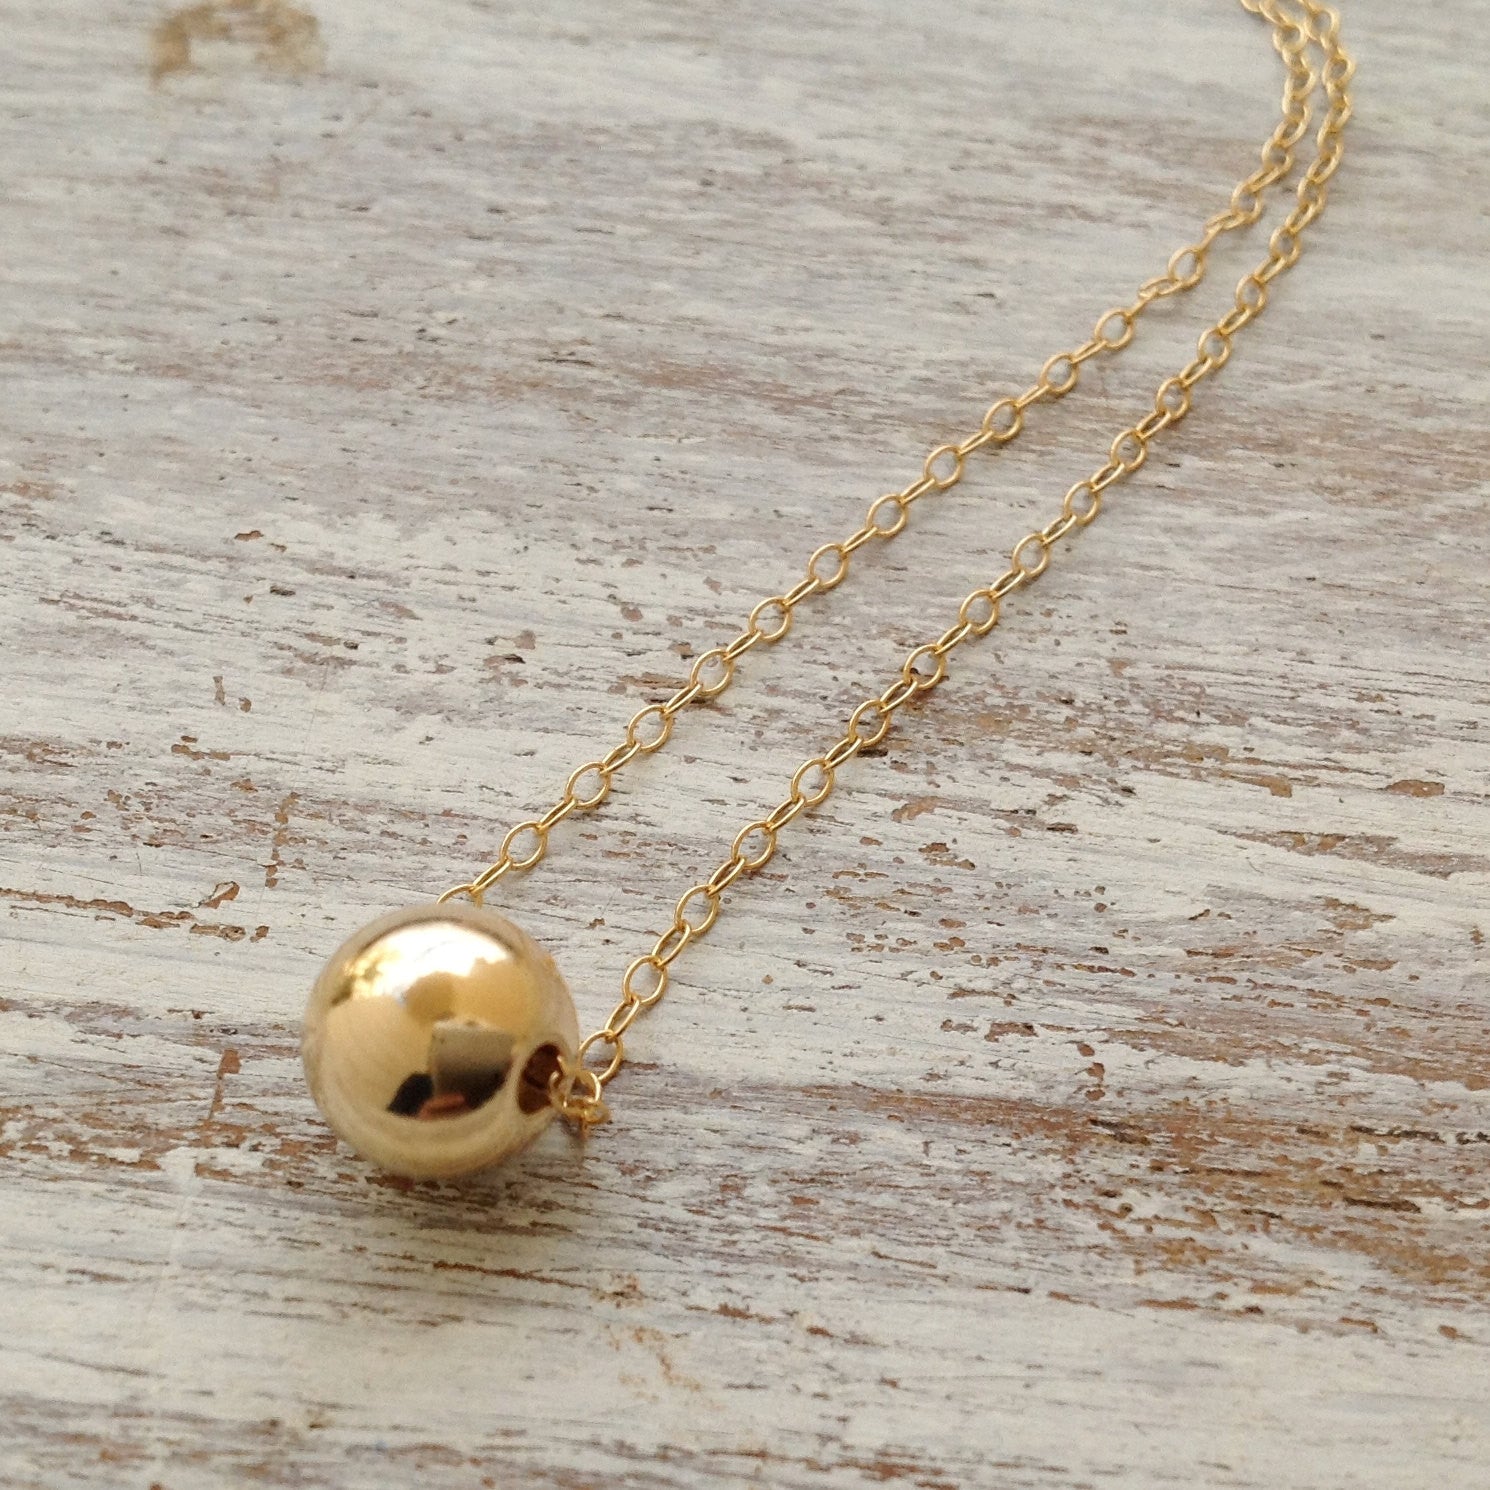 gold ball necklace, Gold necklace, Ball necklace, Gold bead necklace ...